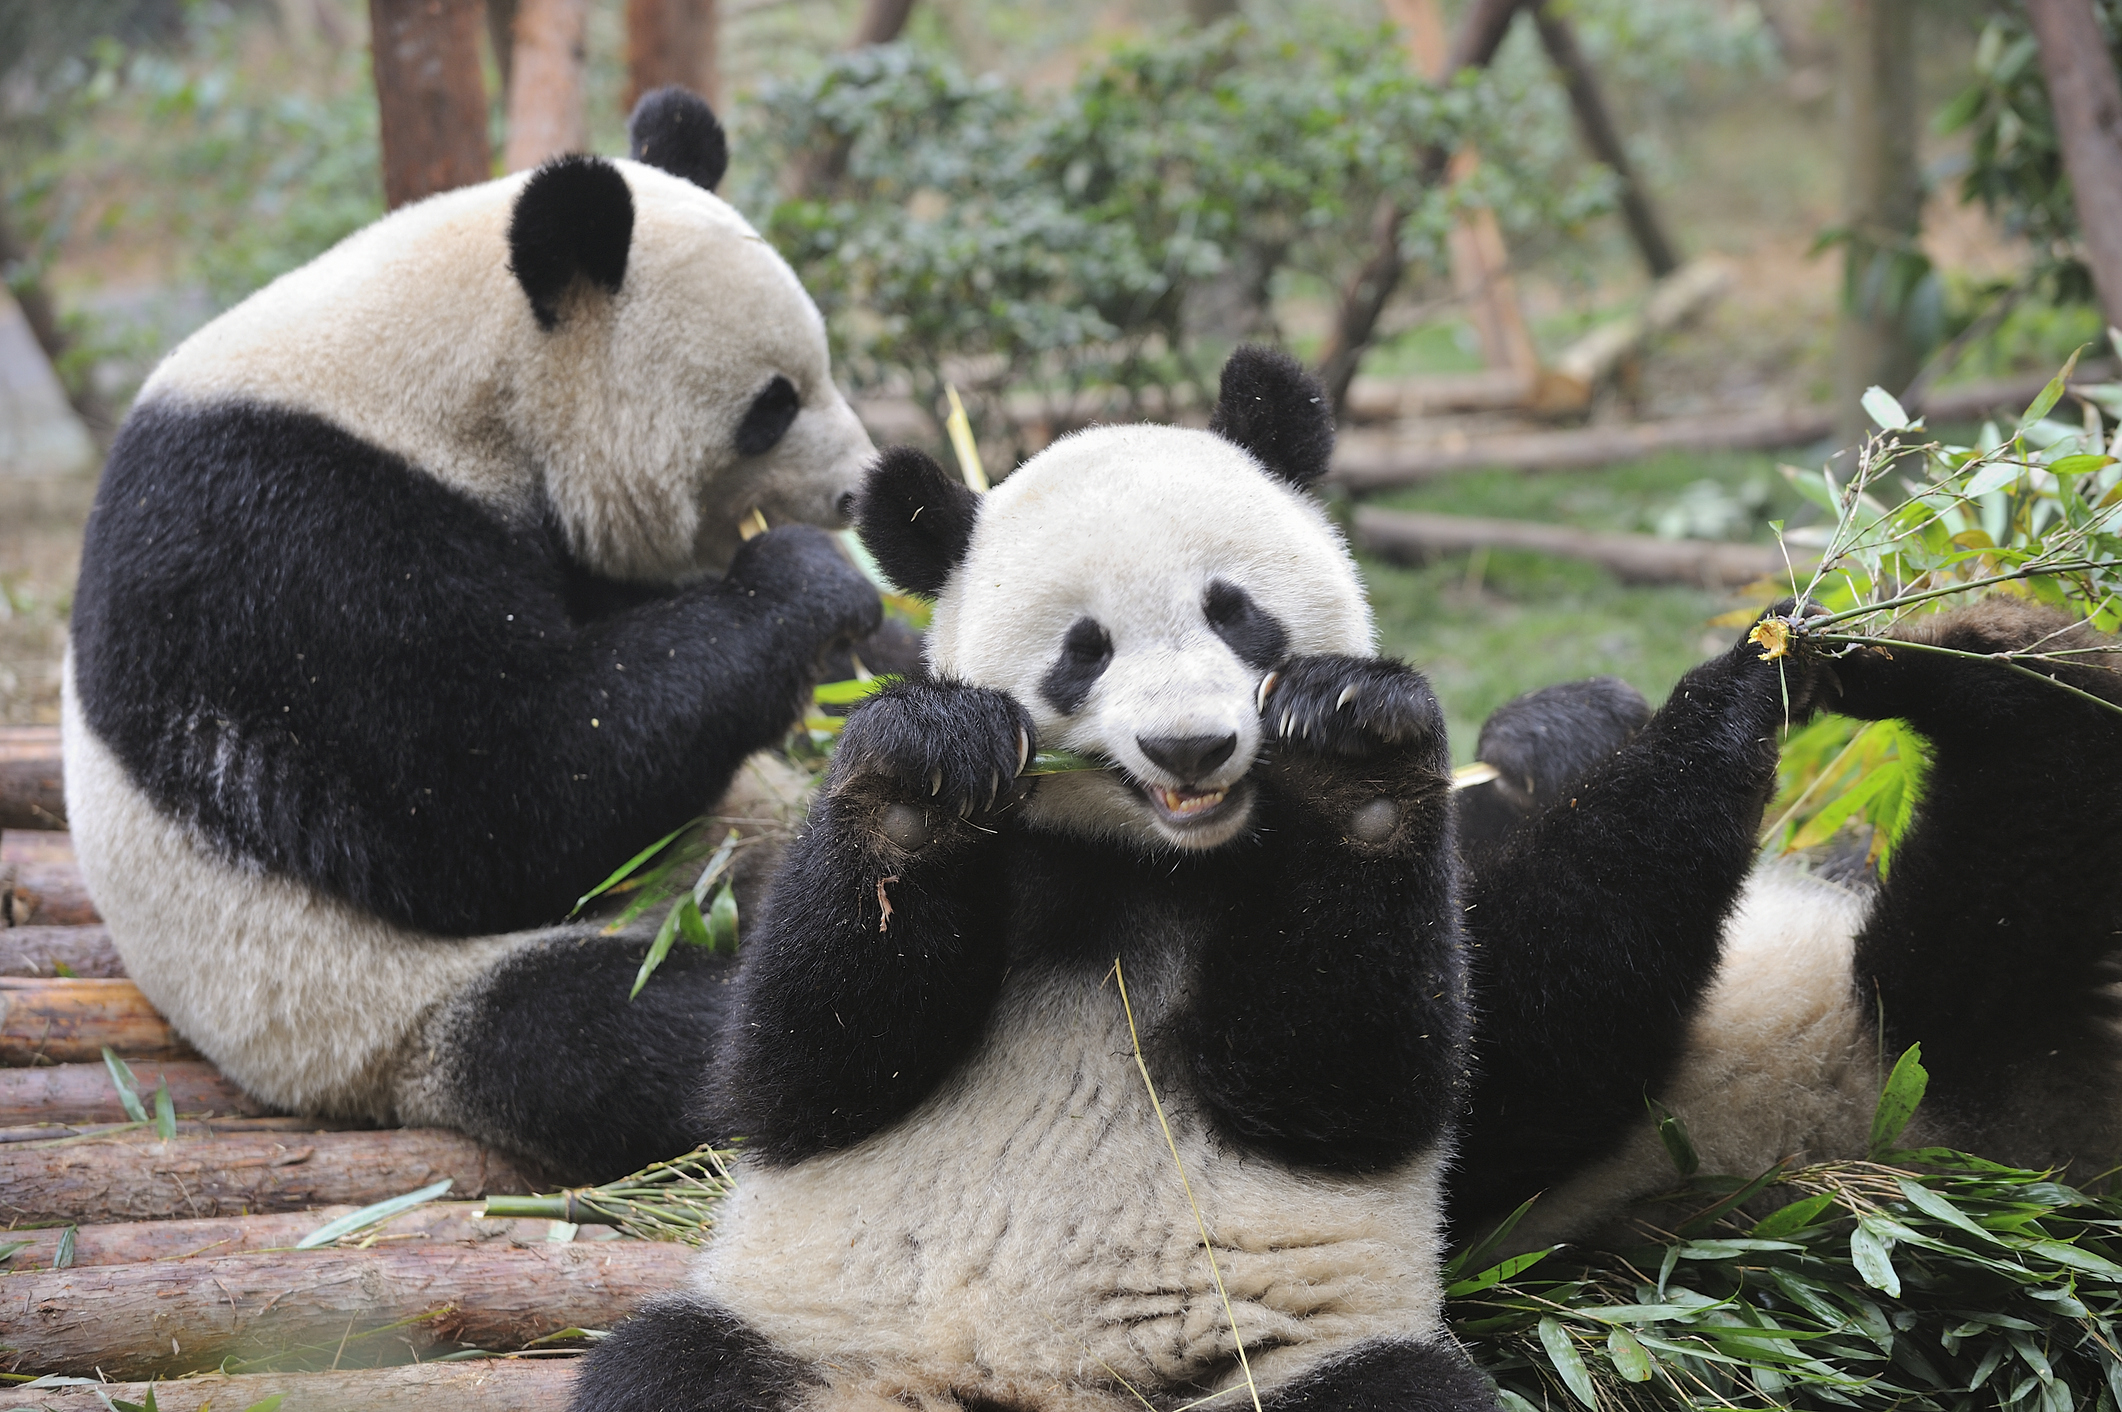 Two pandas sitting and eating bamboo in a forested habitat